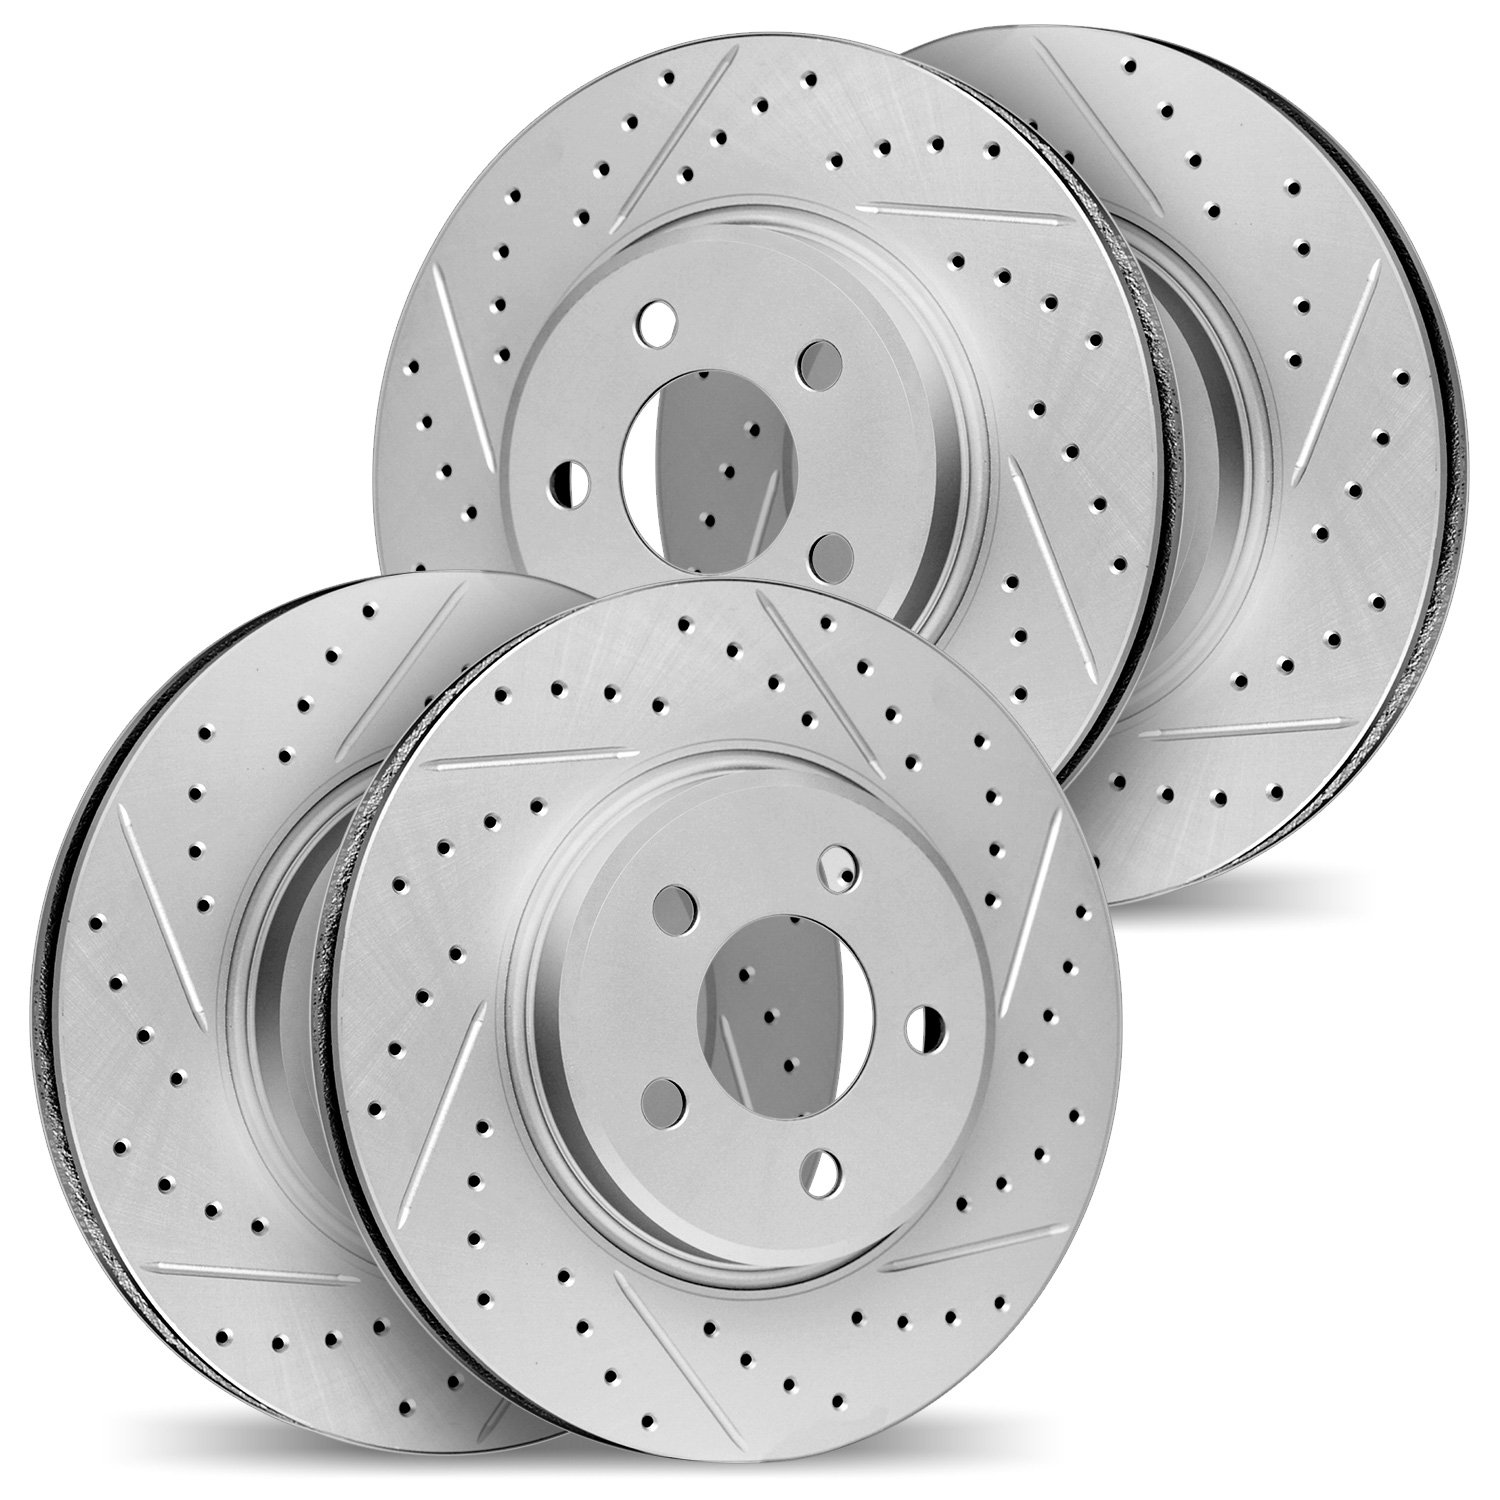 2004-54044 Geoperformance Drilled/Slotted Brake Rotors, Fits Select Ford/Lincoln/Mercury/Mazda, Position: Front and Rear